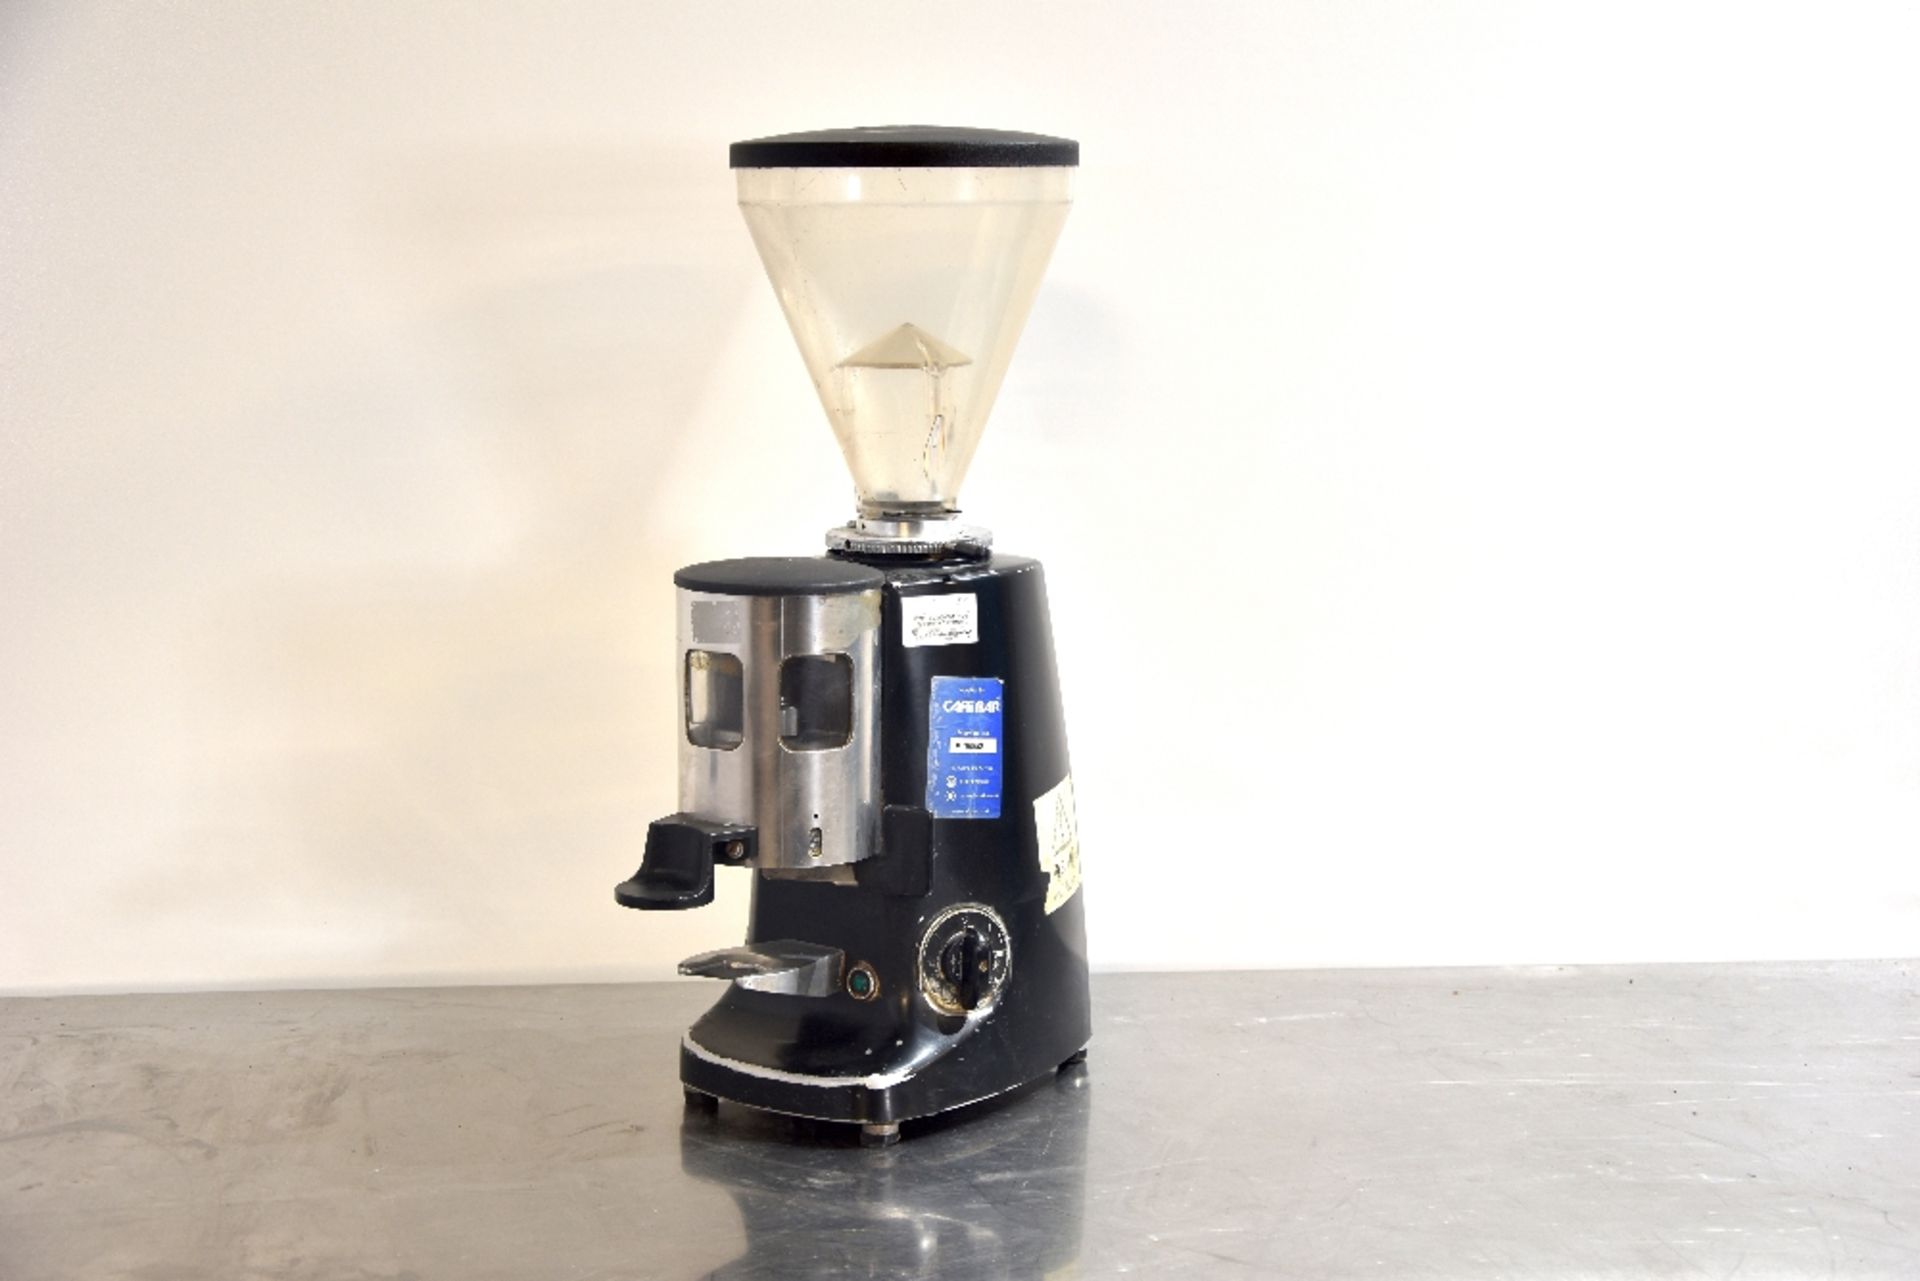 Mazzer Commercial Coffee Bean Grinder -1ph - Tested Working